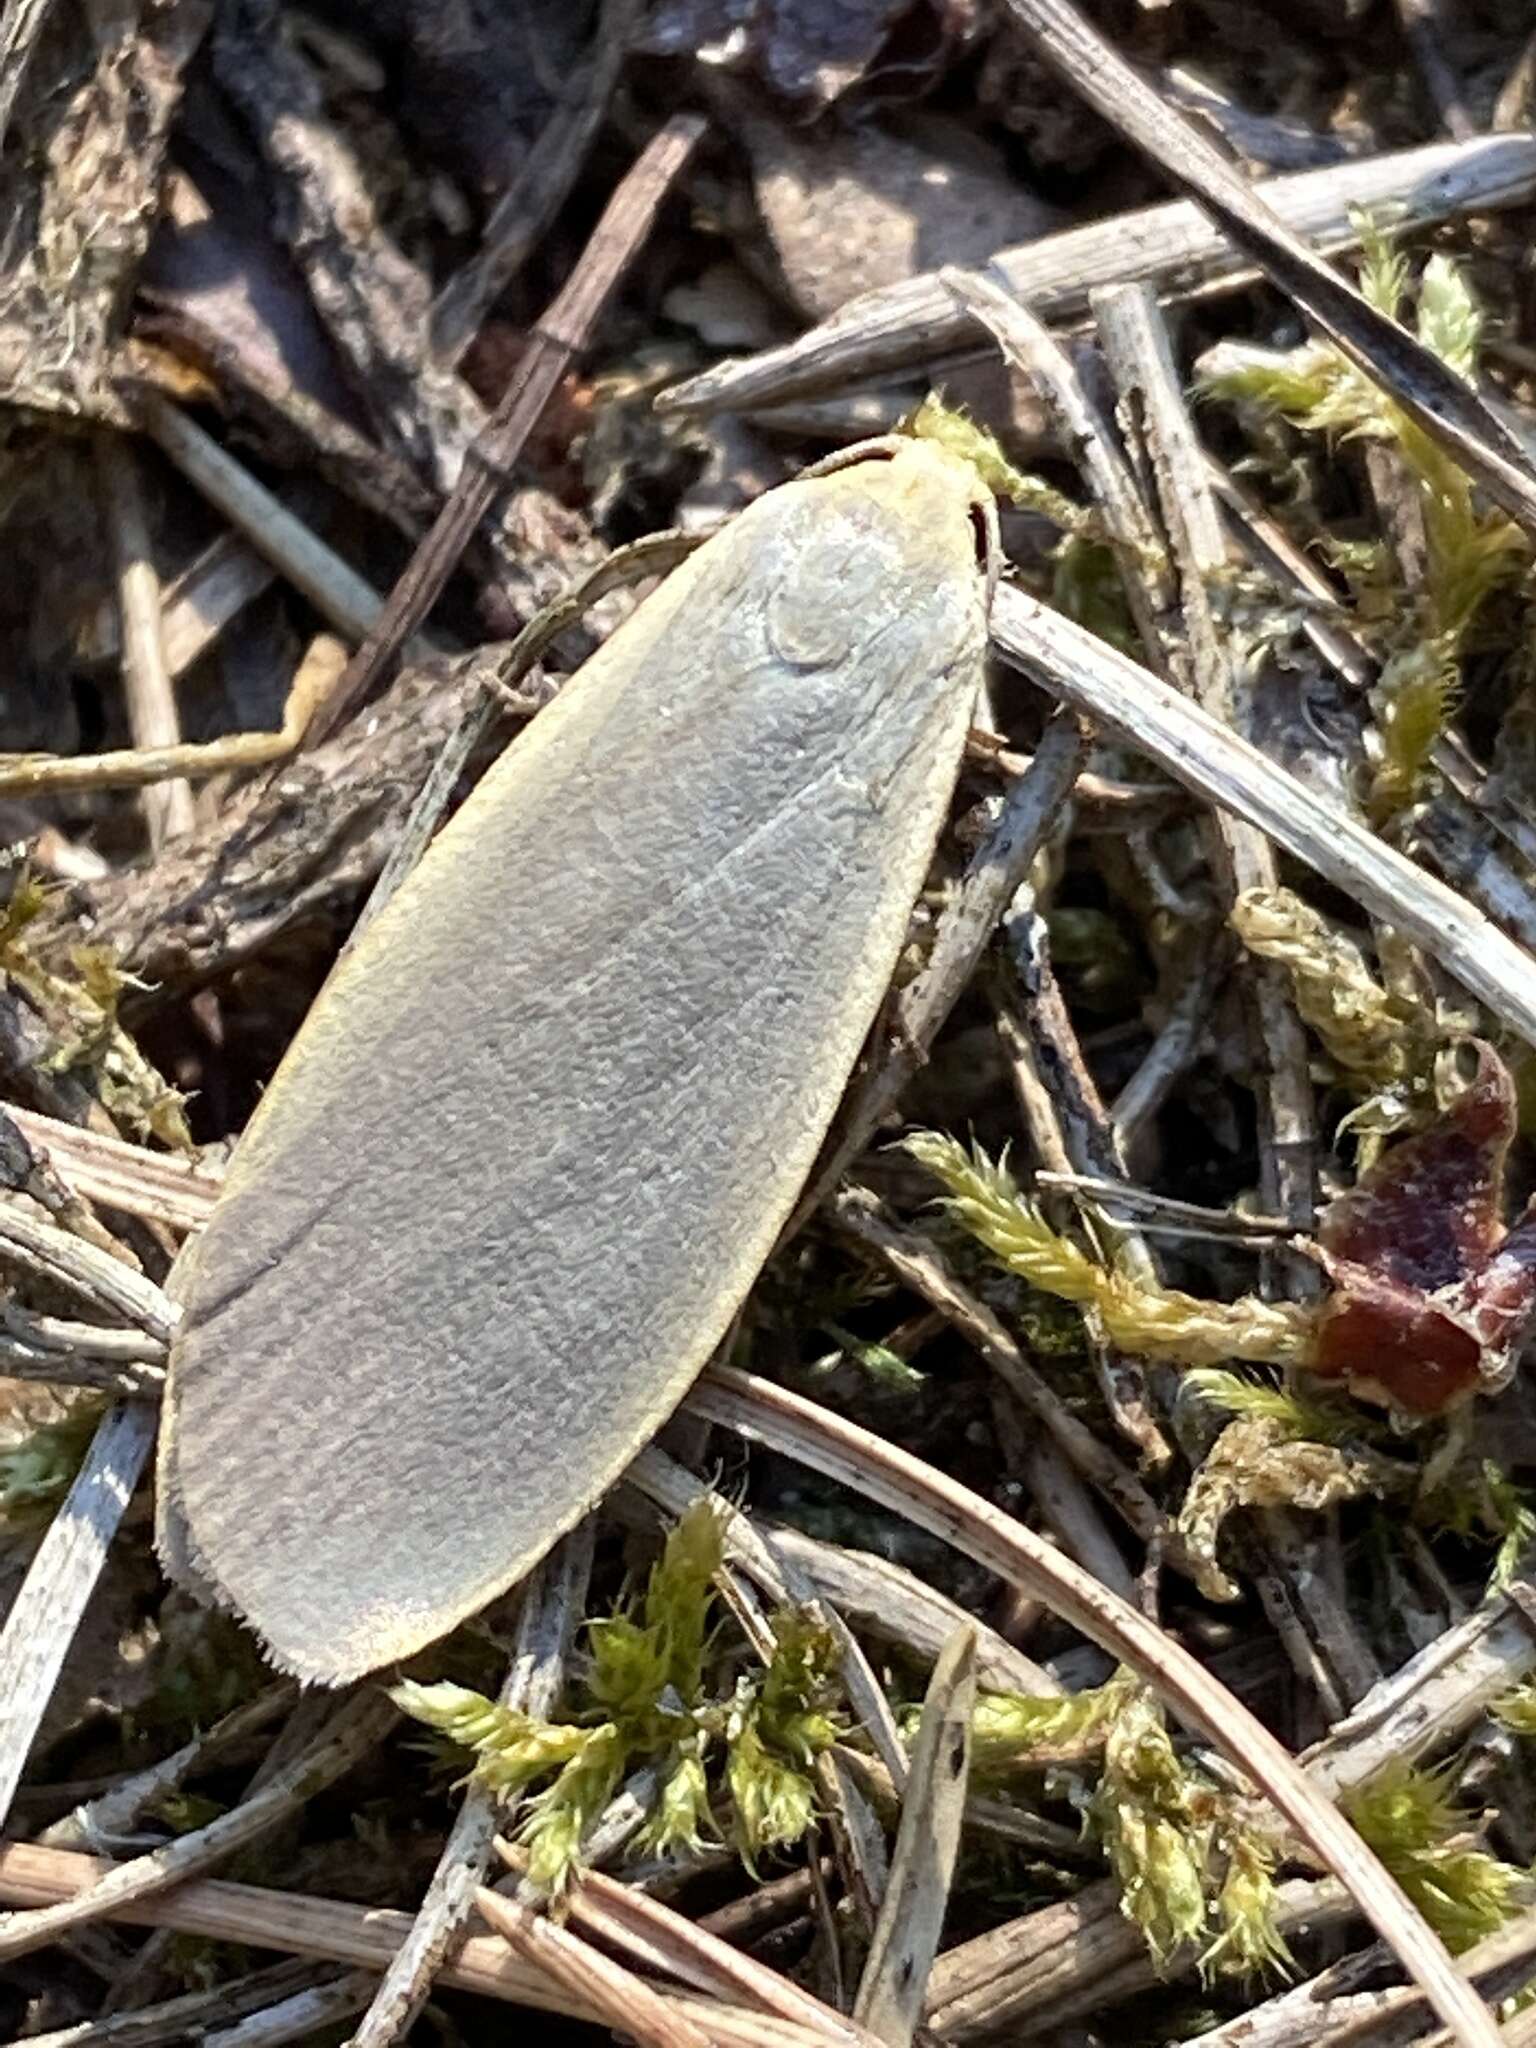 Image of dingy footman